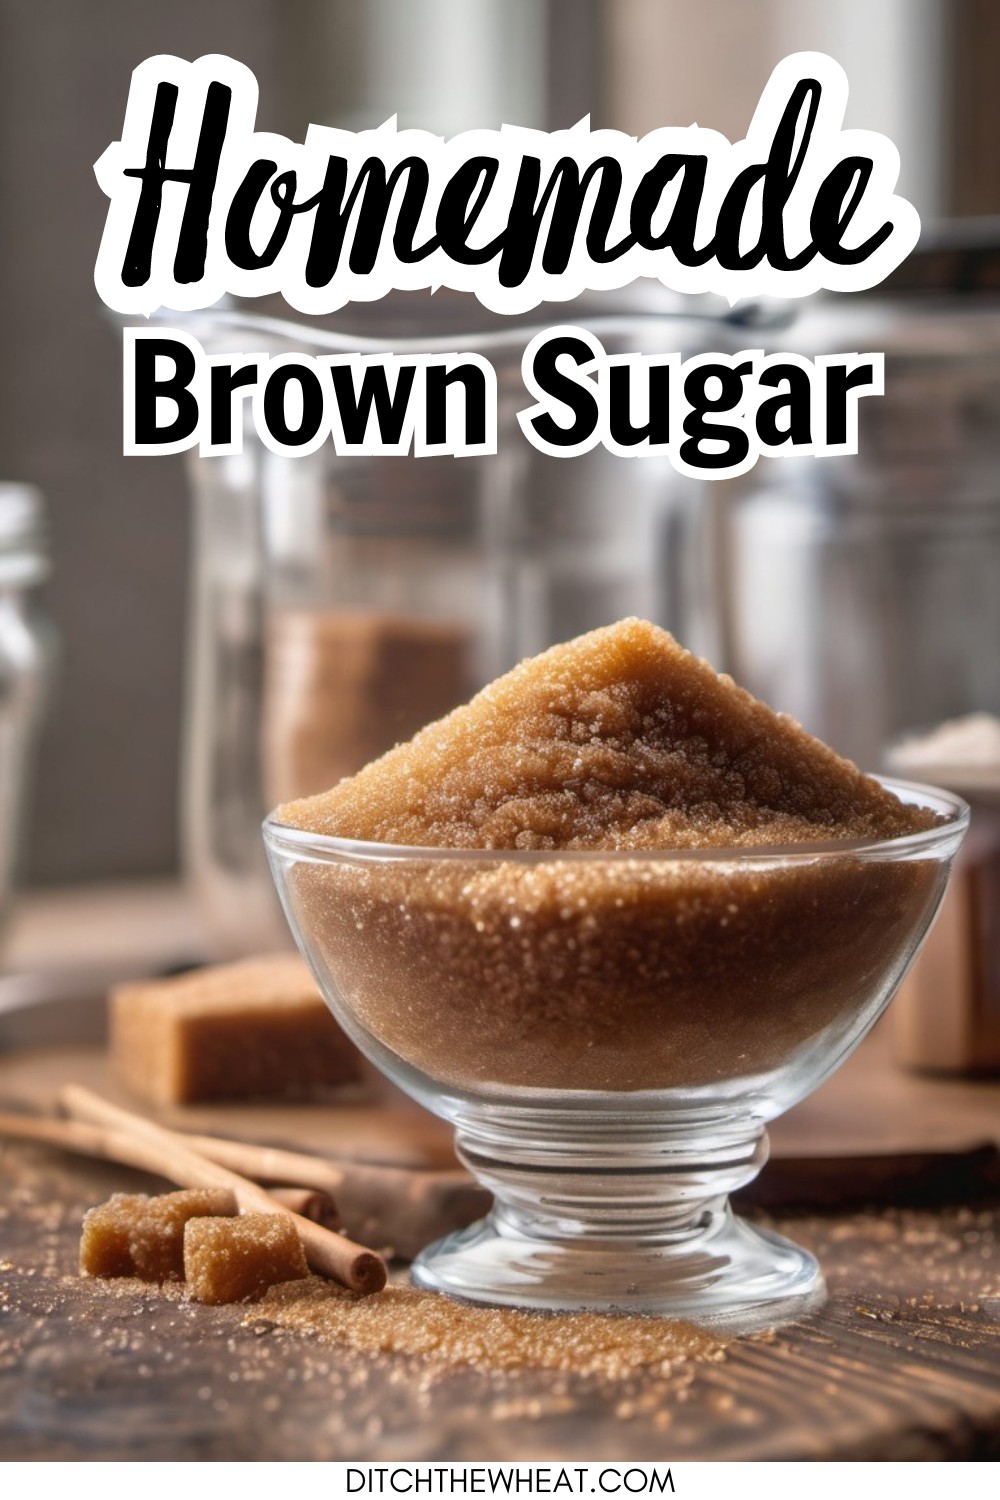 A glass bowl filled with brown sugar.